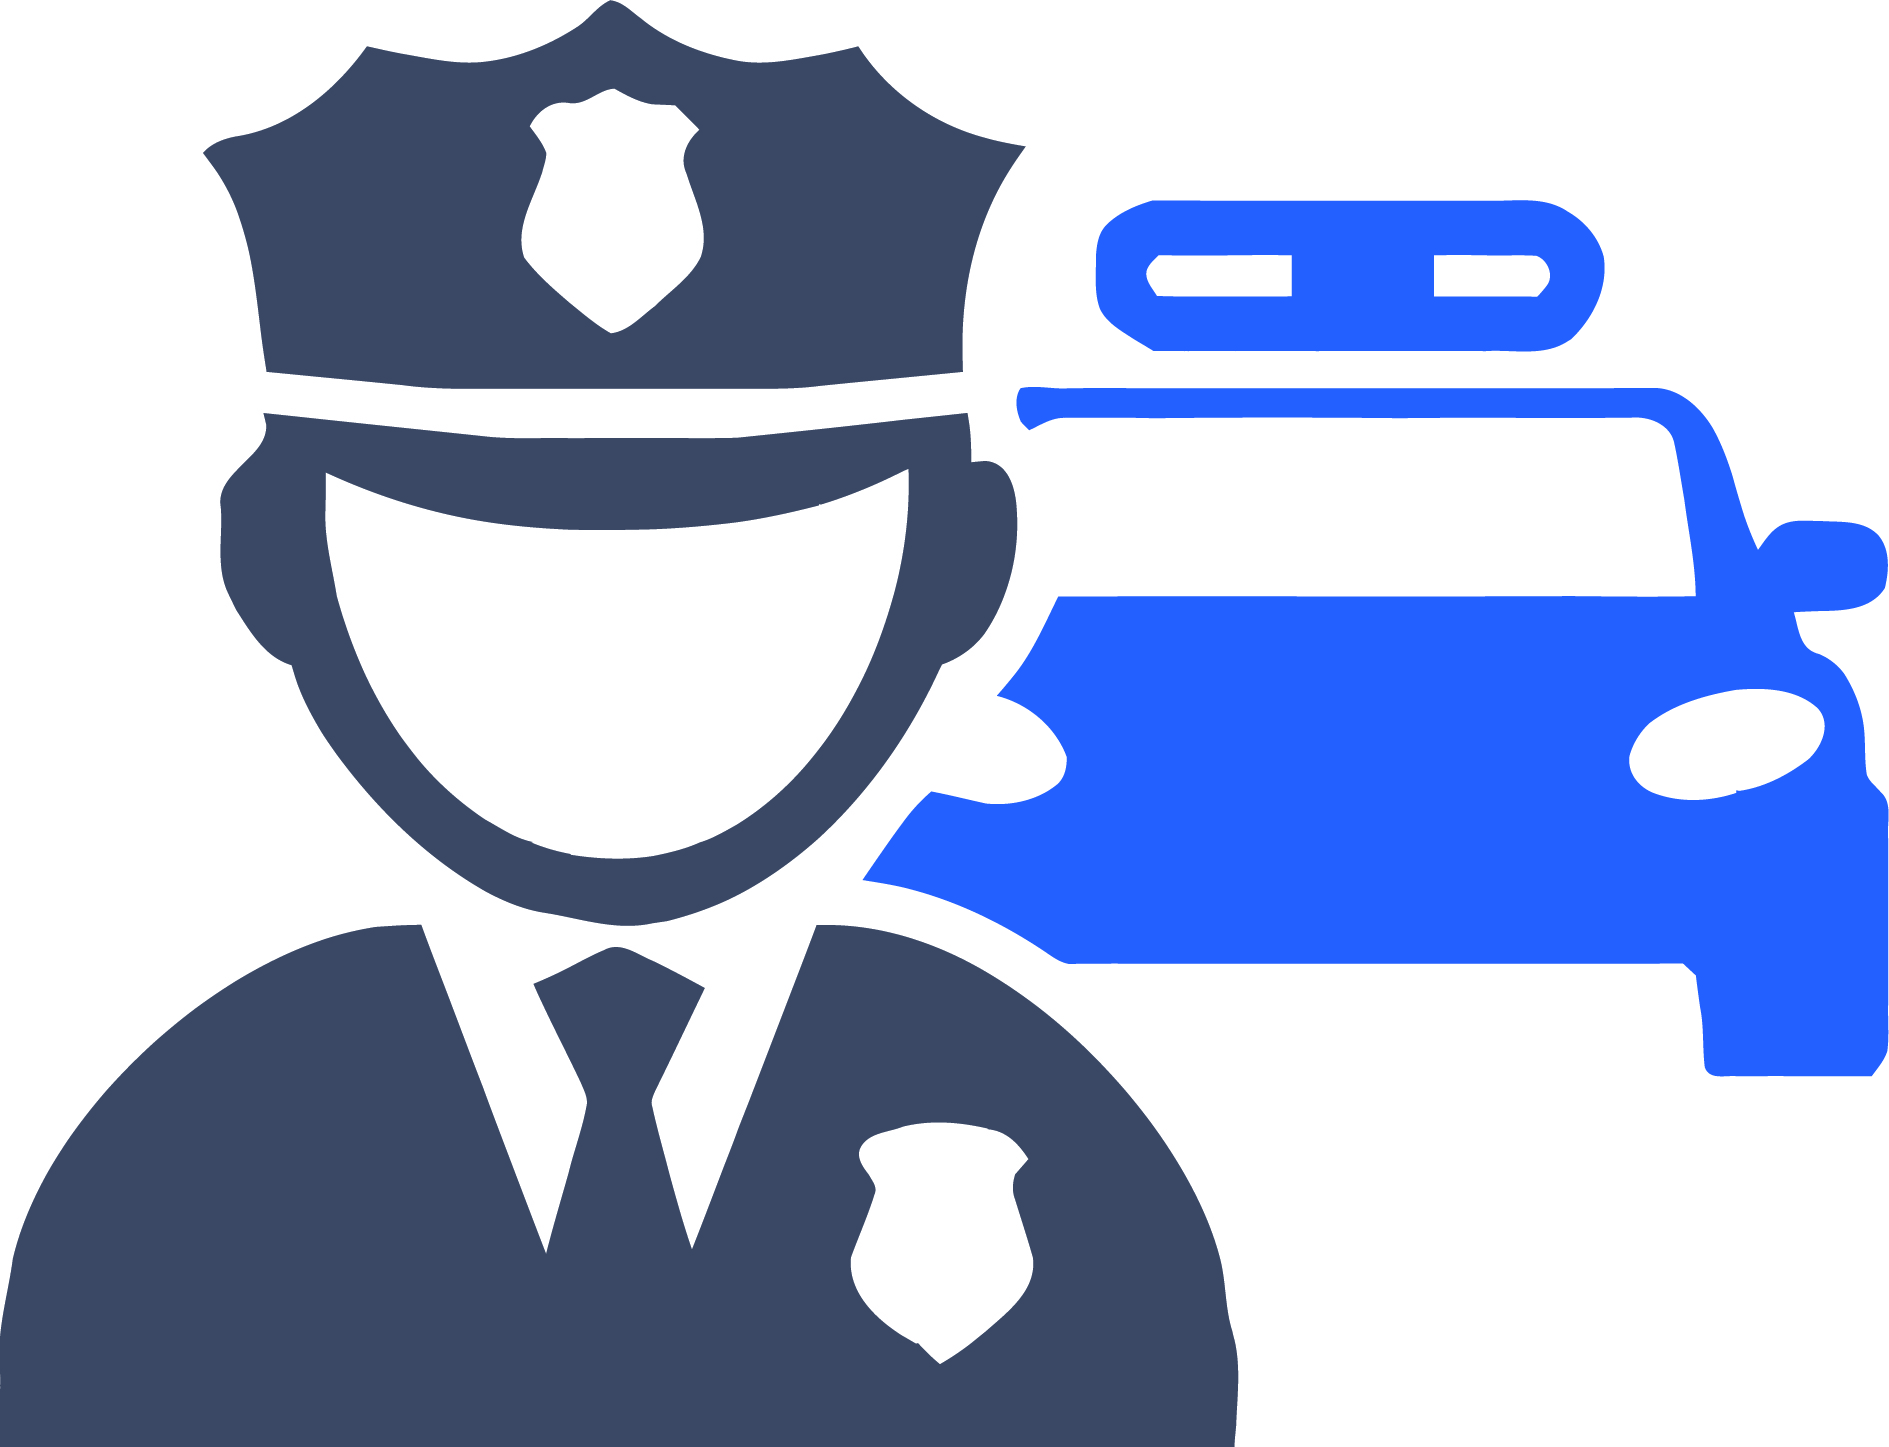 kisspng-police-officer-computer-icons-police-station-polic-5ae086d51b8805 [Convertido]